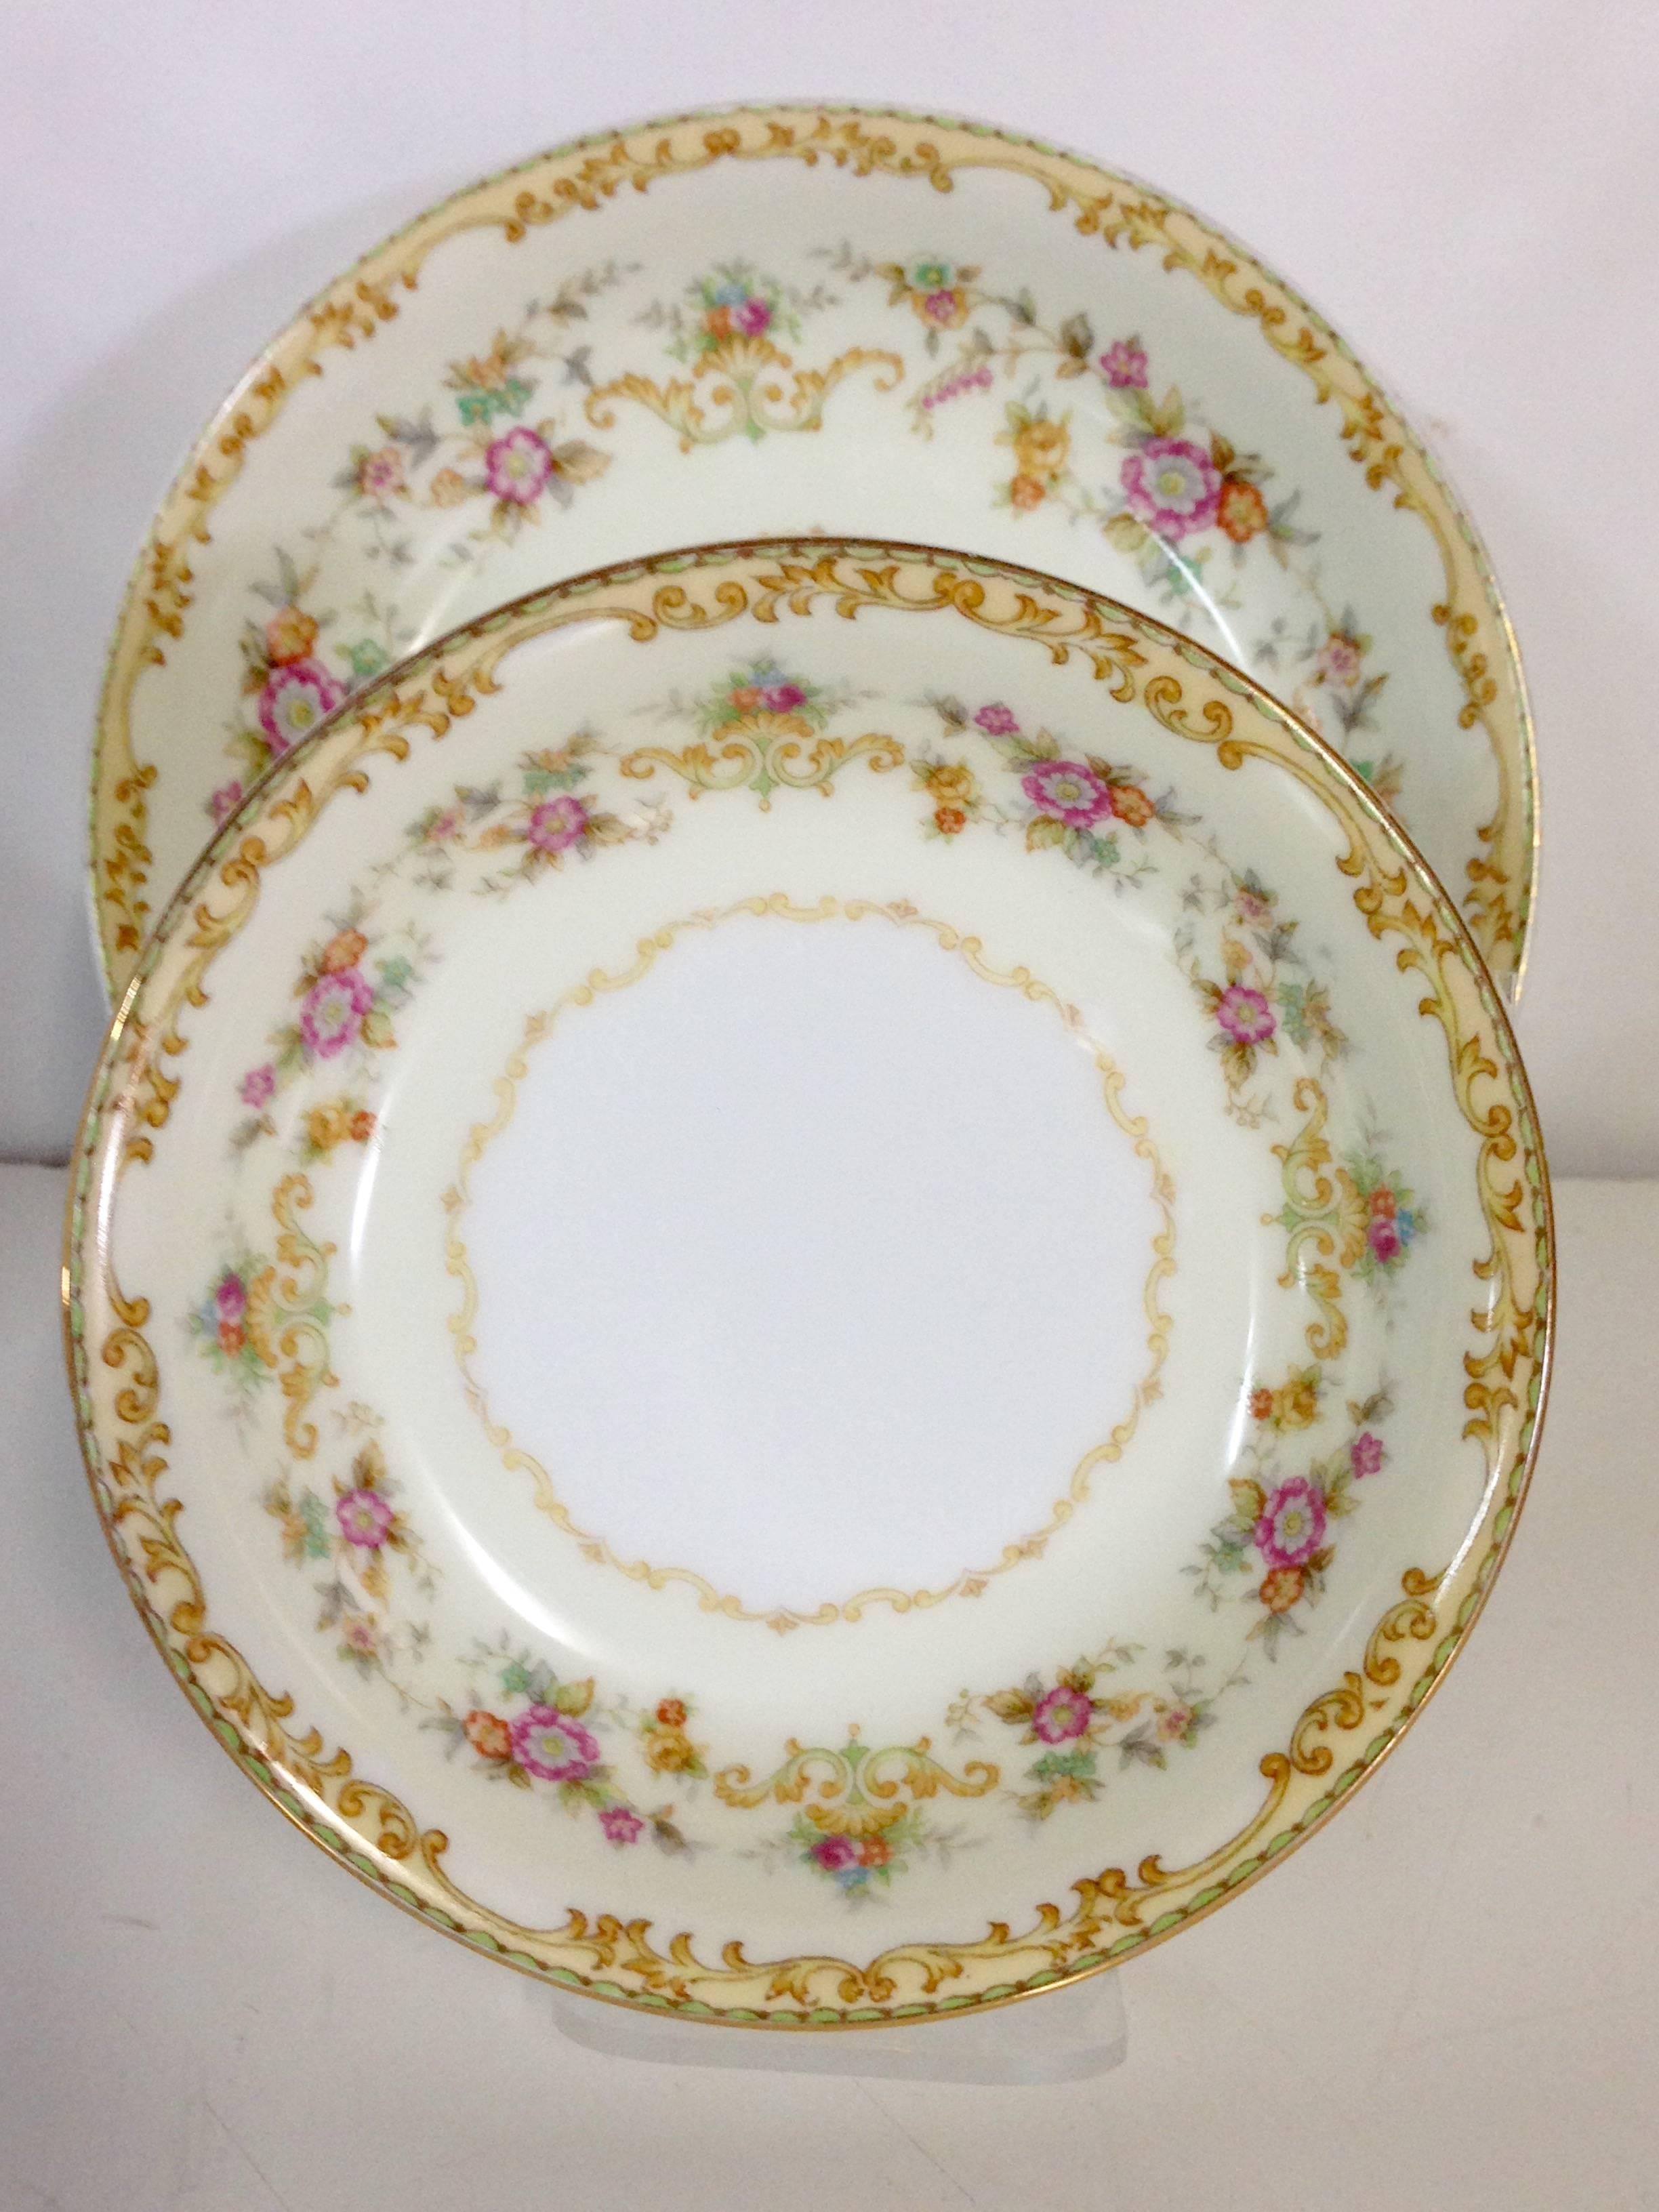 1930s set of nine Japanese Art Nouveau style white ground with pale yellow border and pink, blue and green flowers with gold scrolls pattern hand-painted 22-karat gold rim detail bowls. Set includes, three rim soup bowls and 6 fruit bowls, 1"